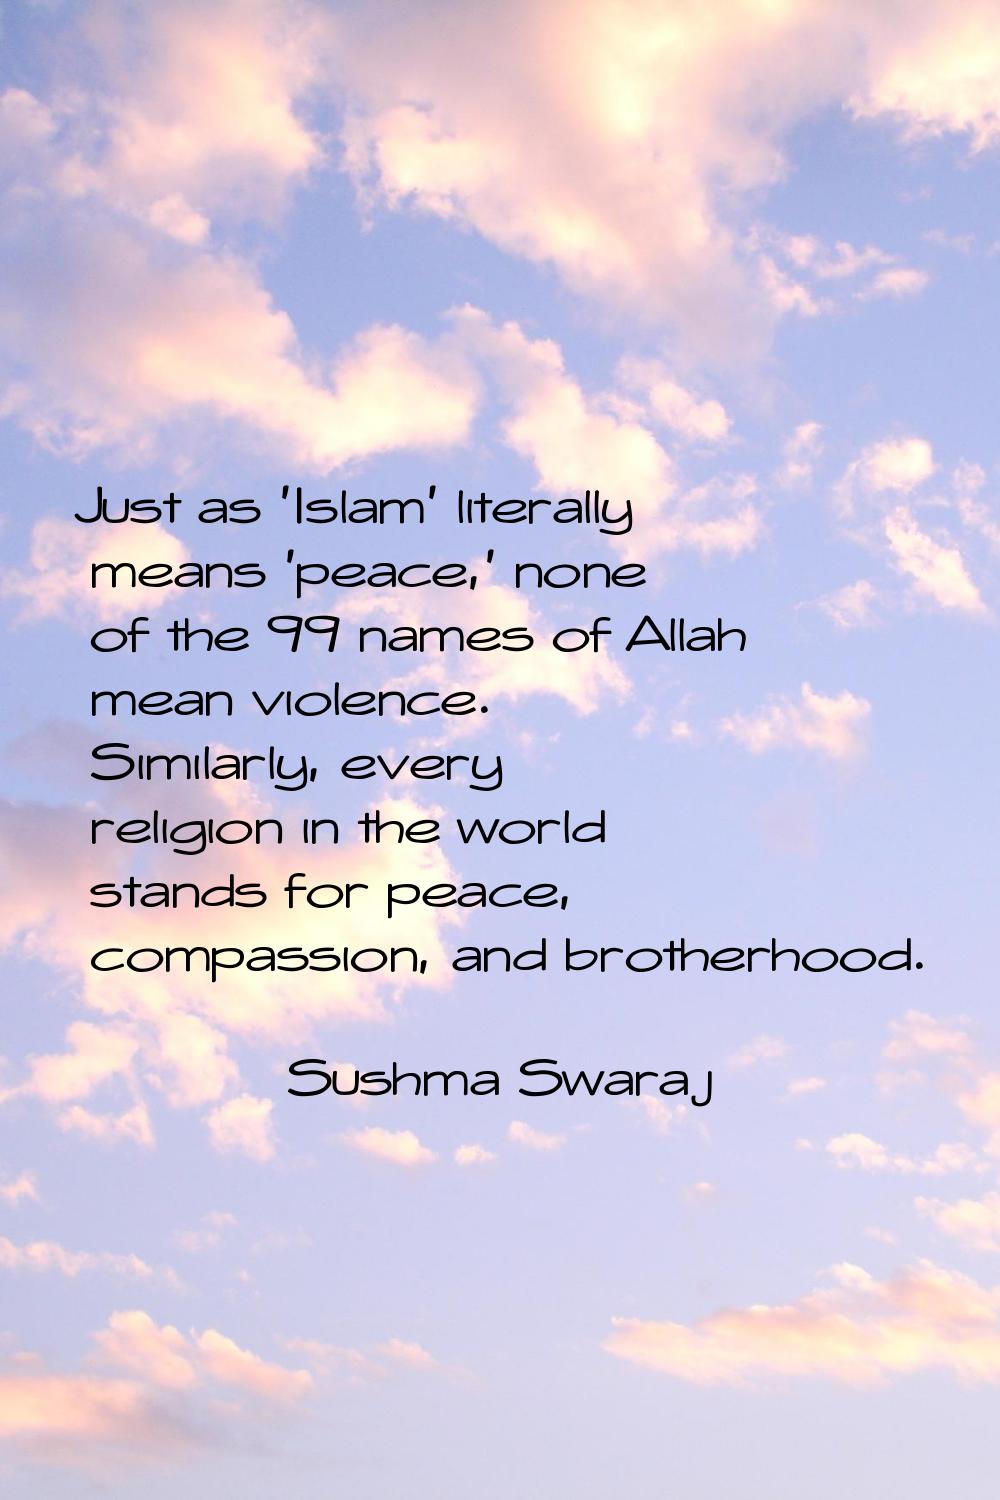 Just as 'Islam' literally means 'peace,' none of the 99 names of Allah mean violence. Similarly, ev